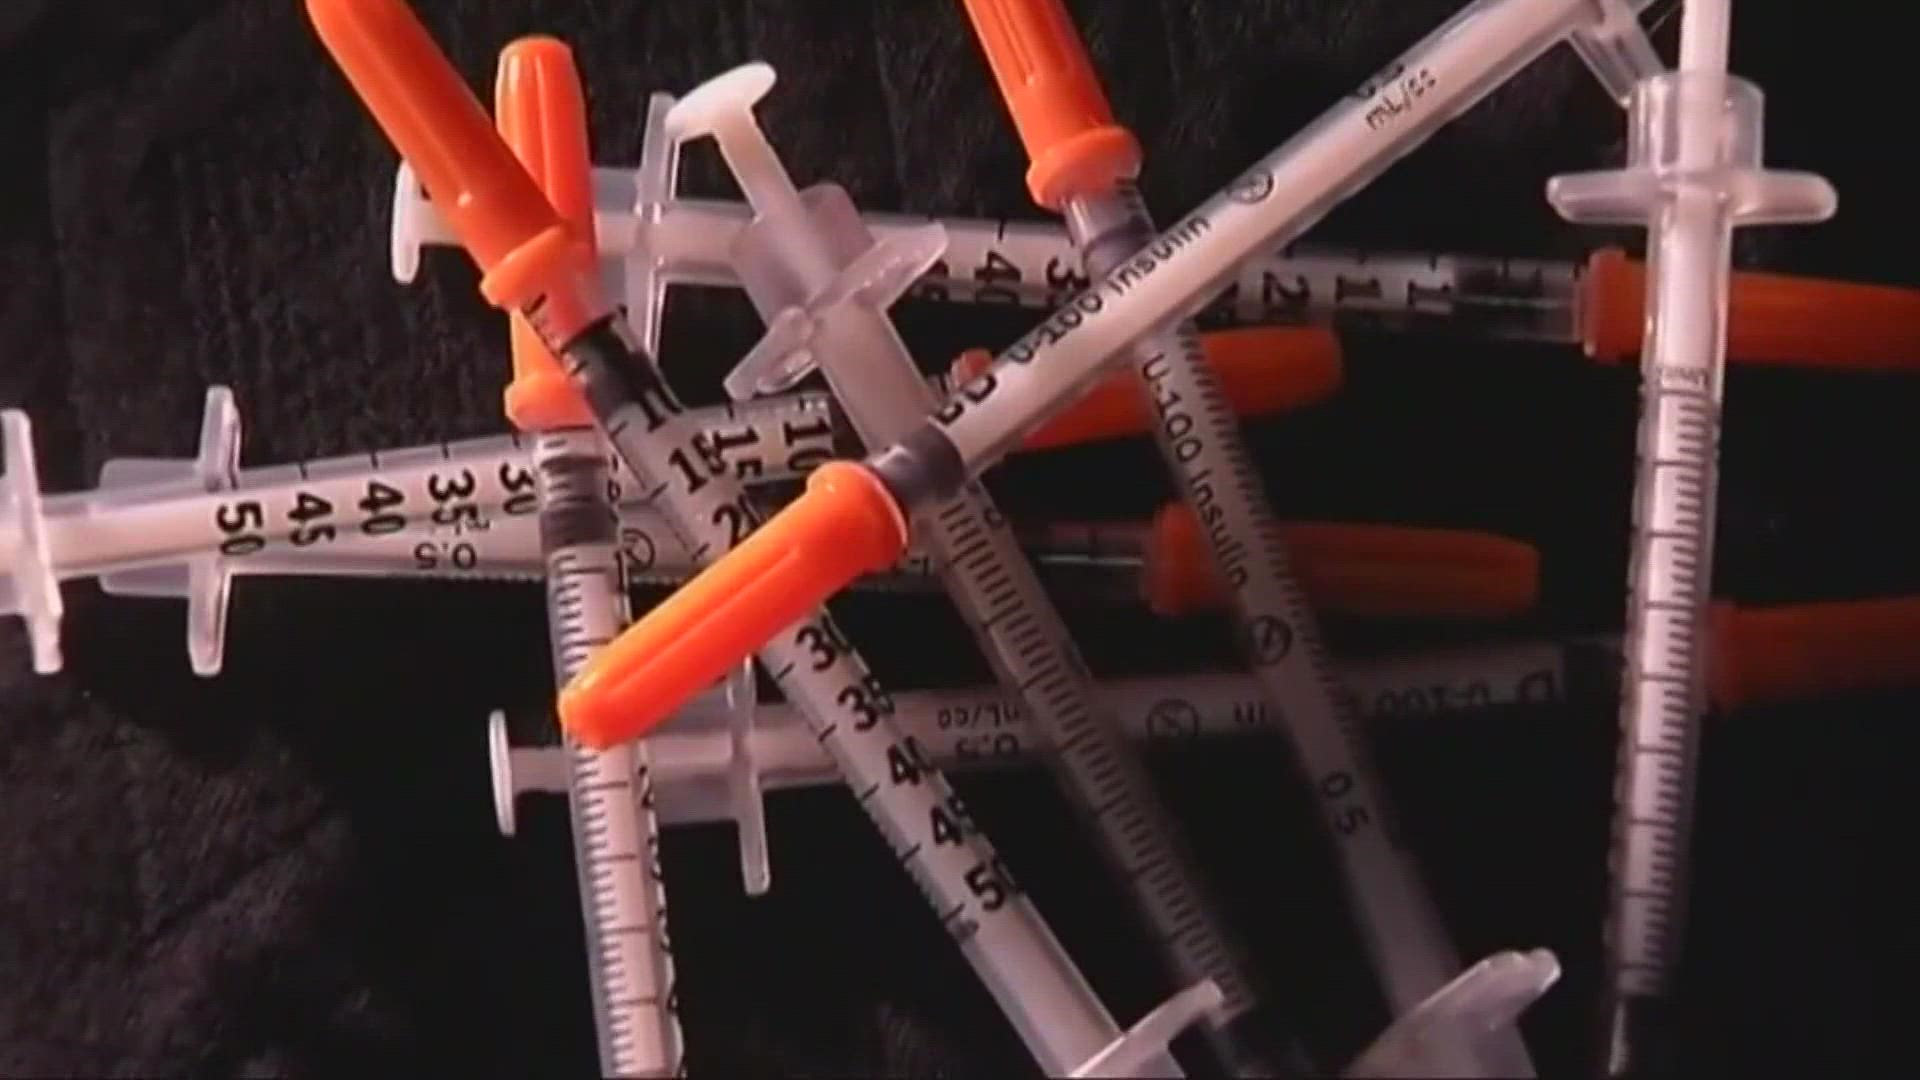 Rep. Genevieve McDonald, D-Stonington, has introduced a bill which would allow Syringe Exchange Programs to distribute needles with exchanging it for a clean one.